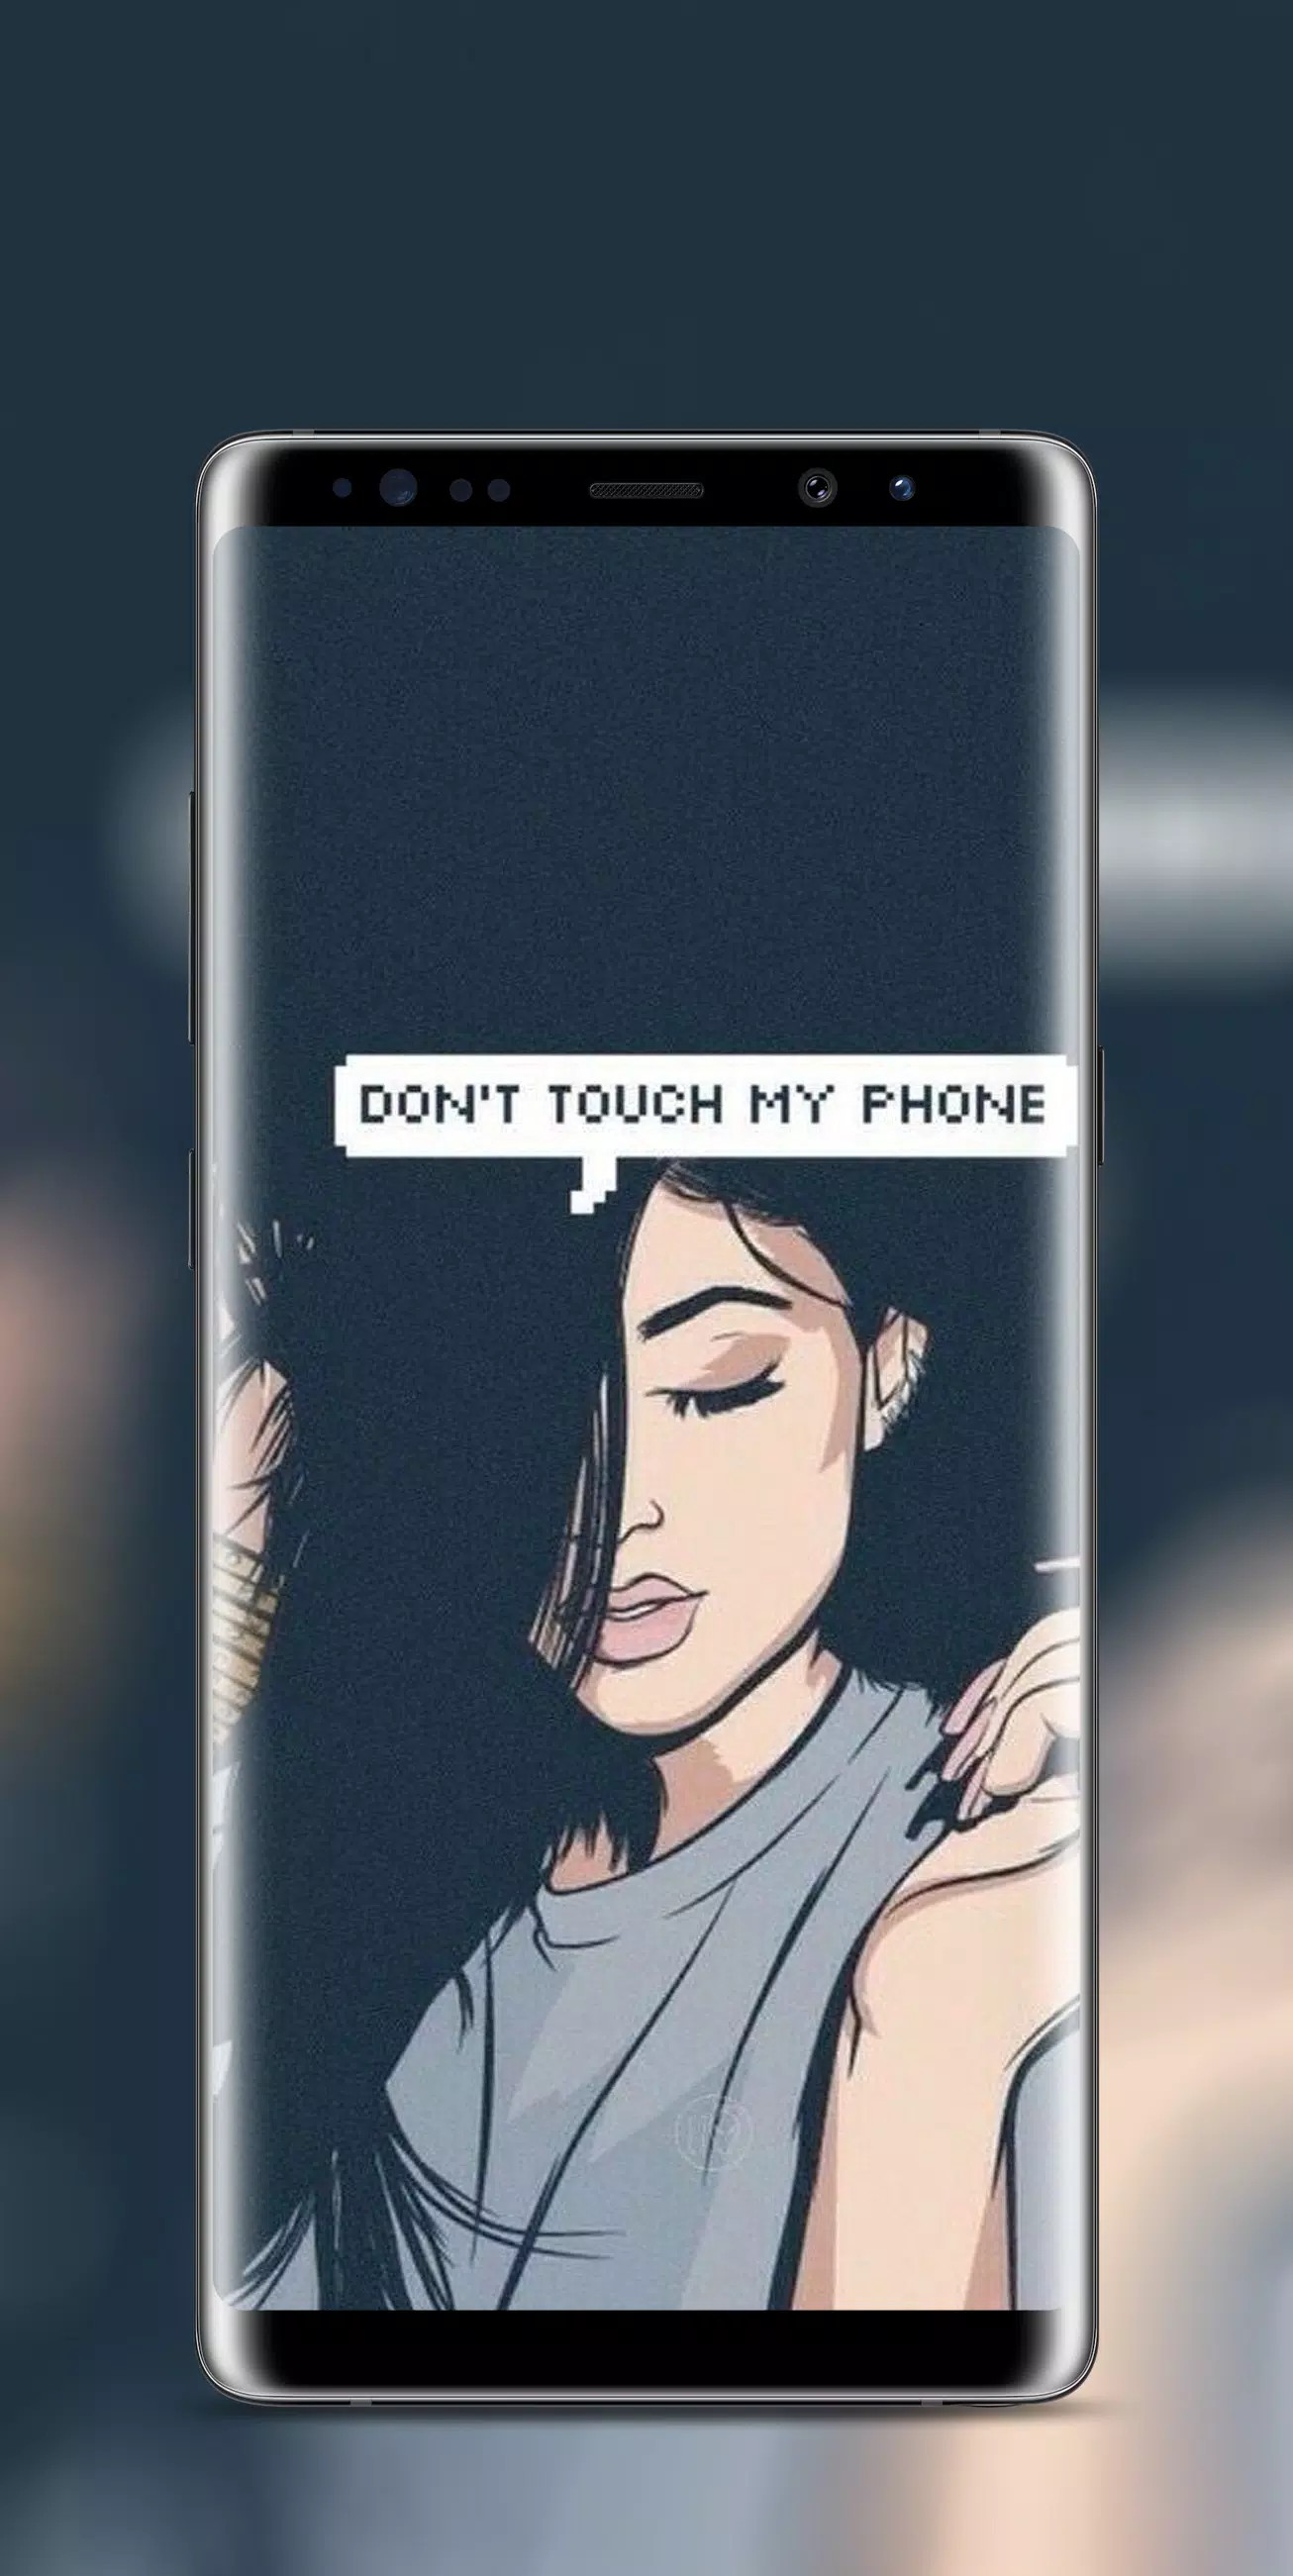 Don't touch my phone